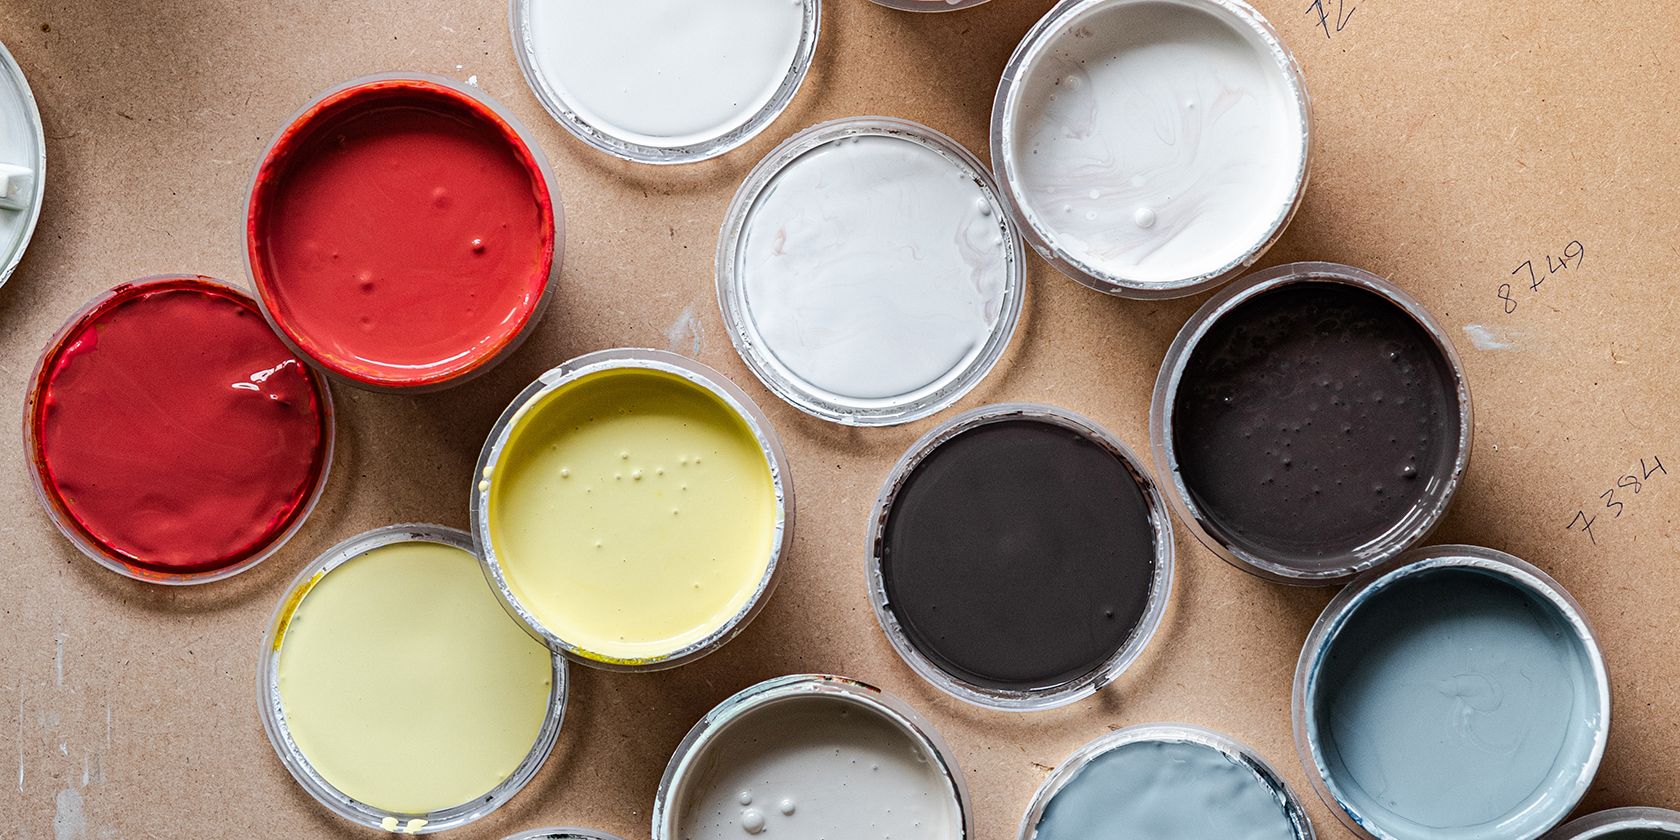 Bird's eye view of lids of open paint tins, colors ranging from red, cream, grey, and white.